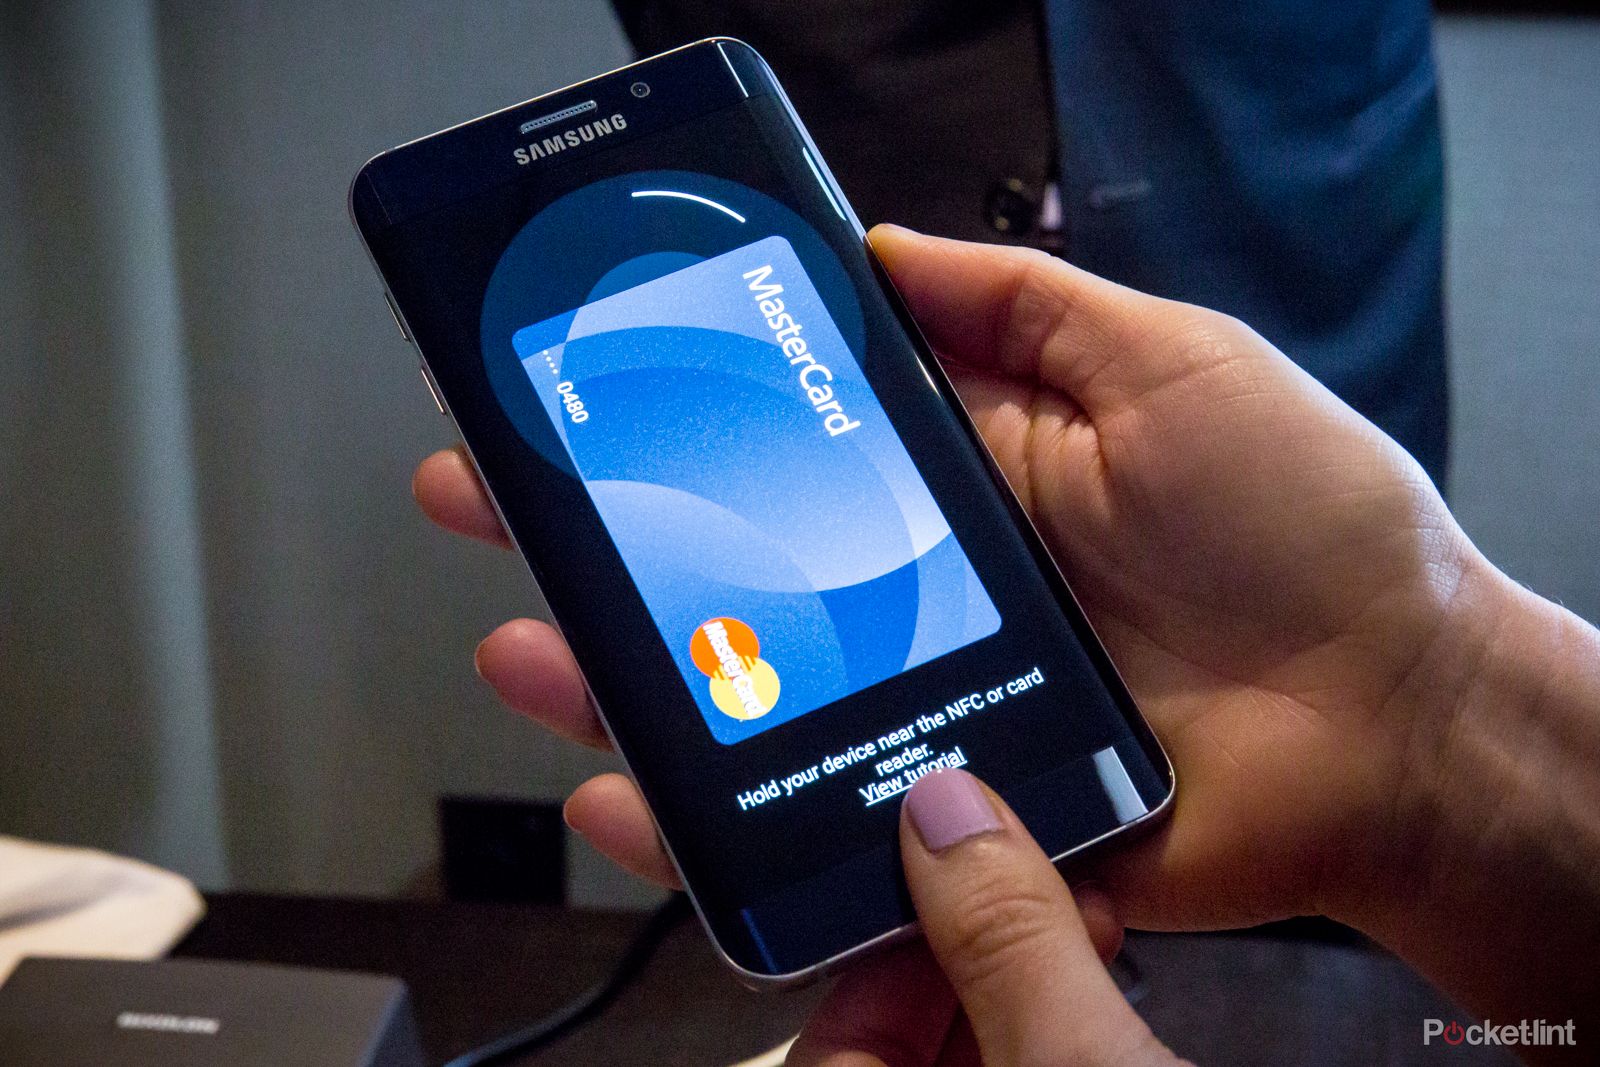 samsung pay won’t launch in the uk until 2017 image 1